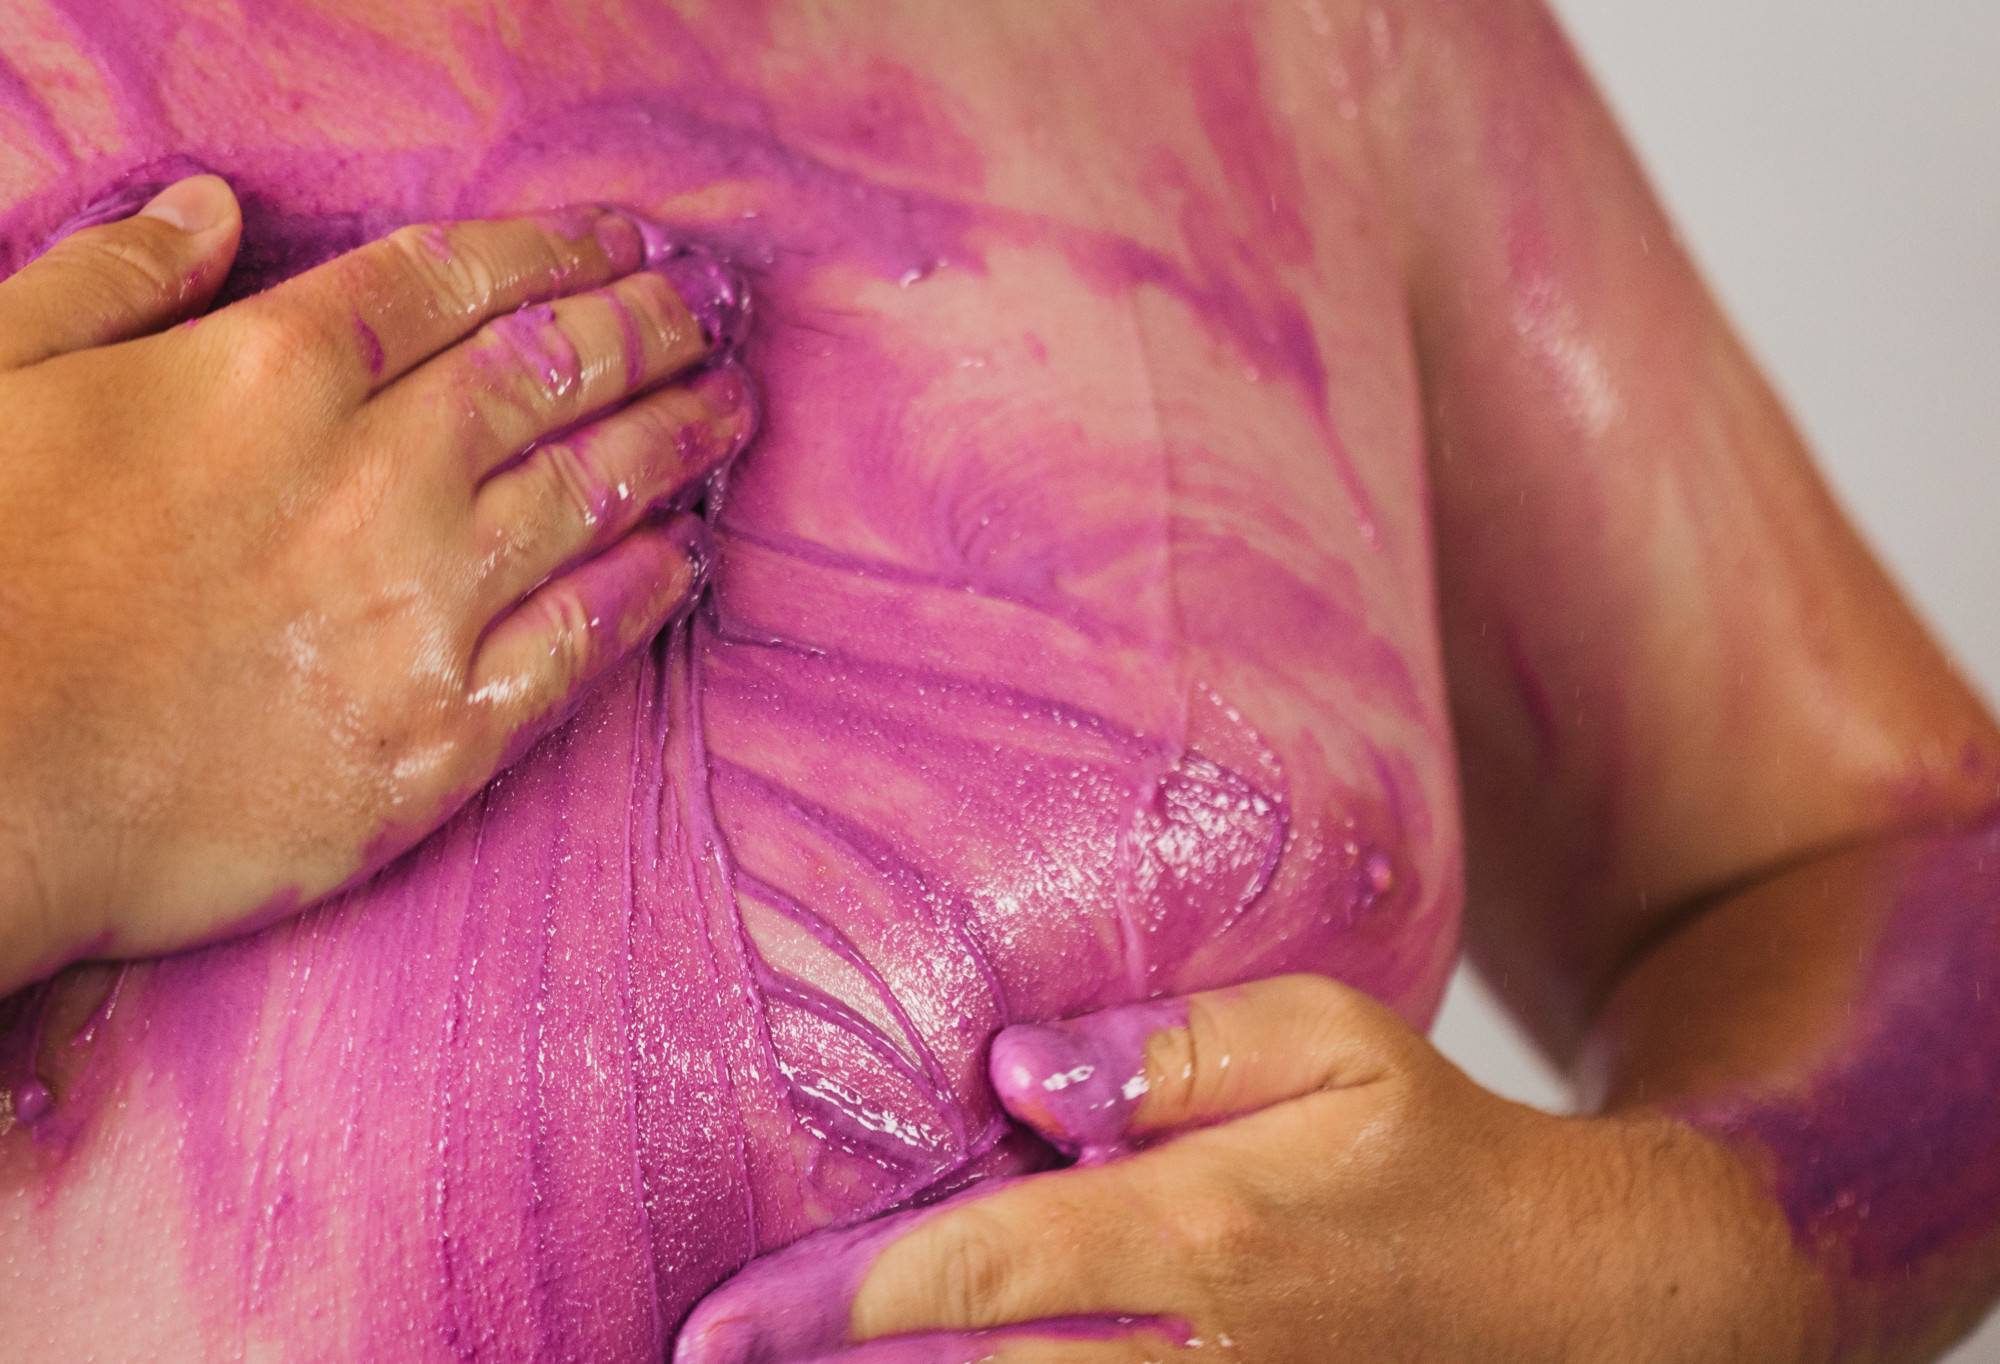 Magic Crystals, a vibrant purple, thick body scrub, is massaged over the chest and pecks.